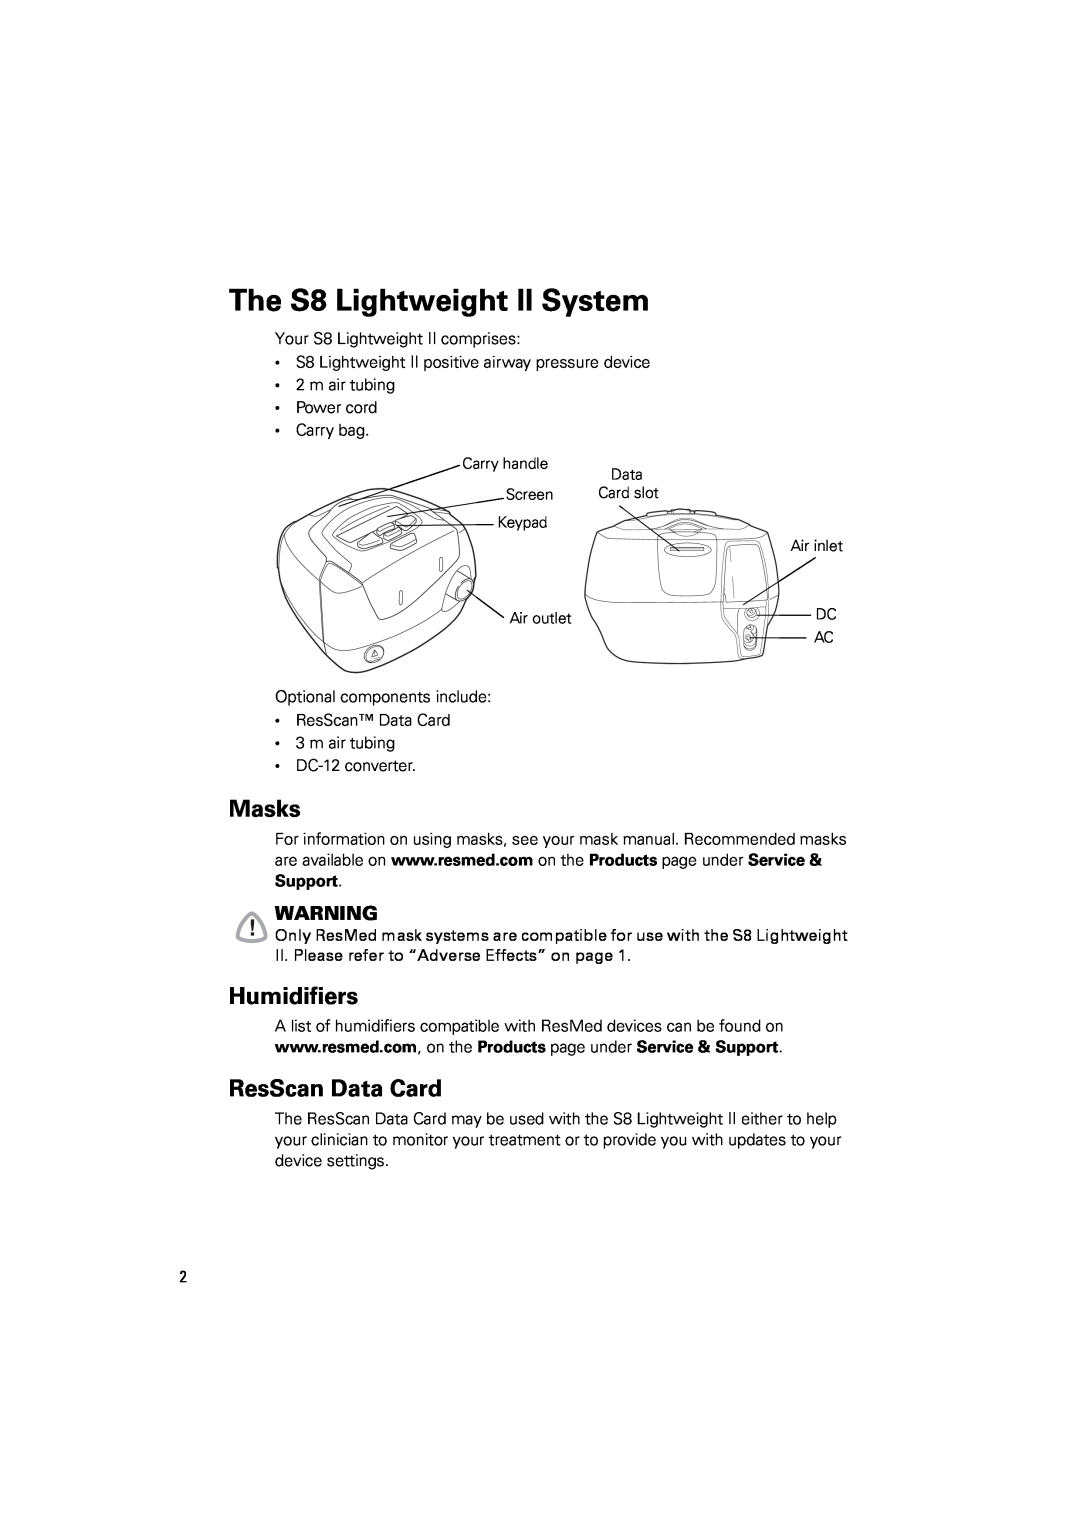 ResMed s8 manual The S8 Lightweight II System, Masks, Humidifiers, ResScan Data Card 